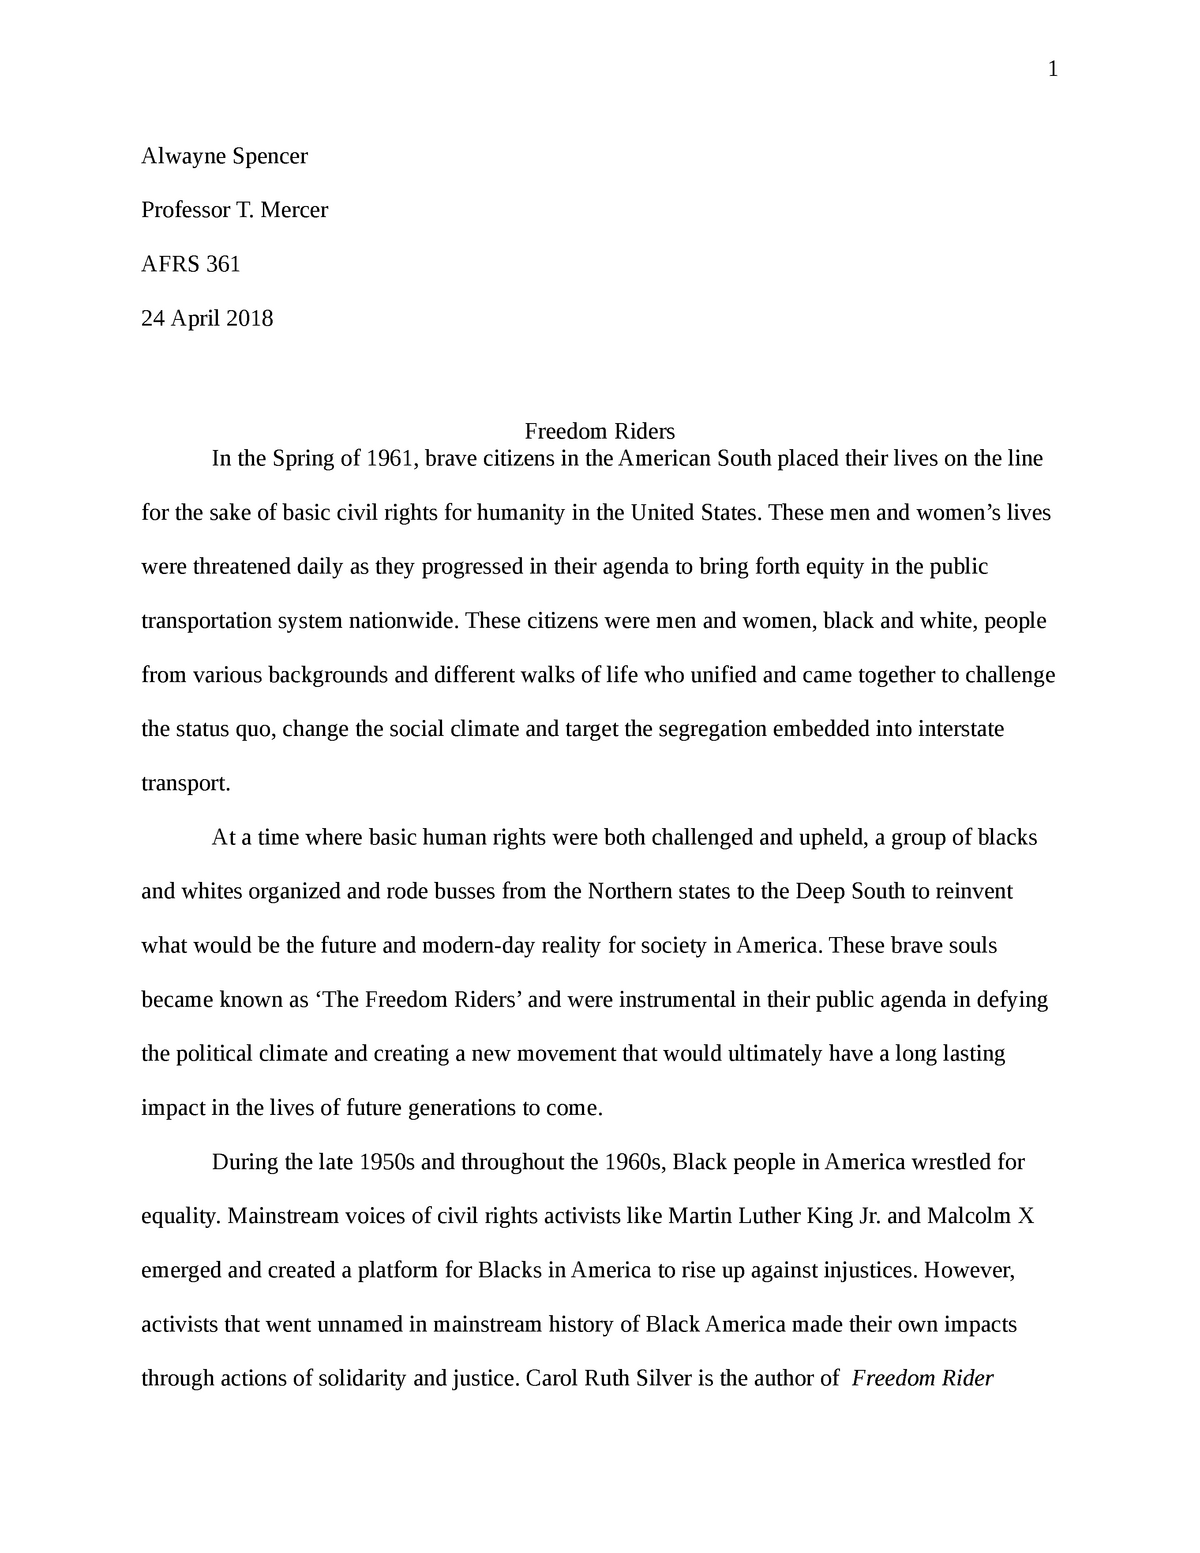 research paper about freedom riders